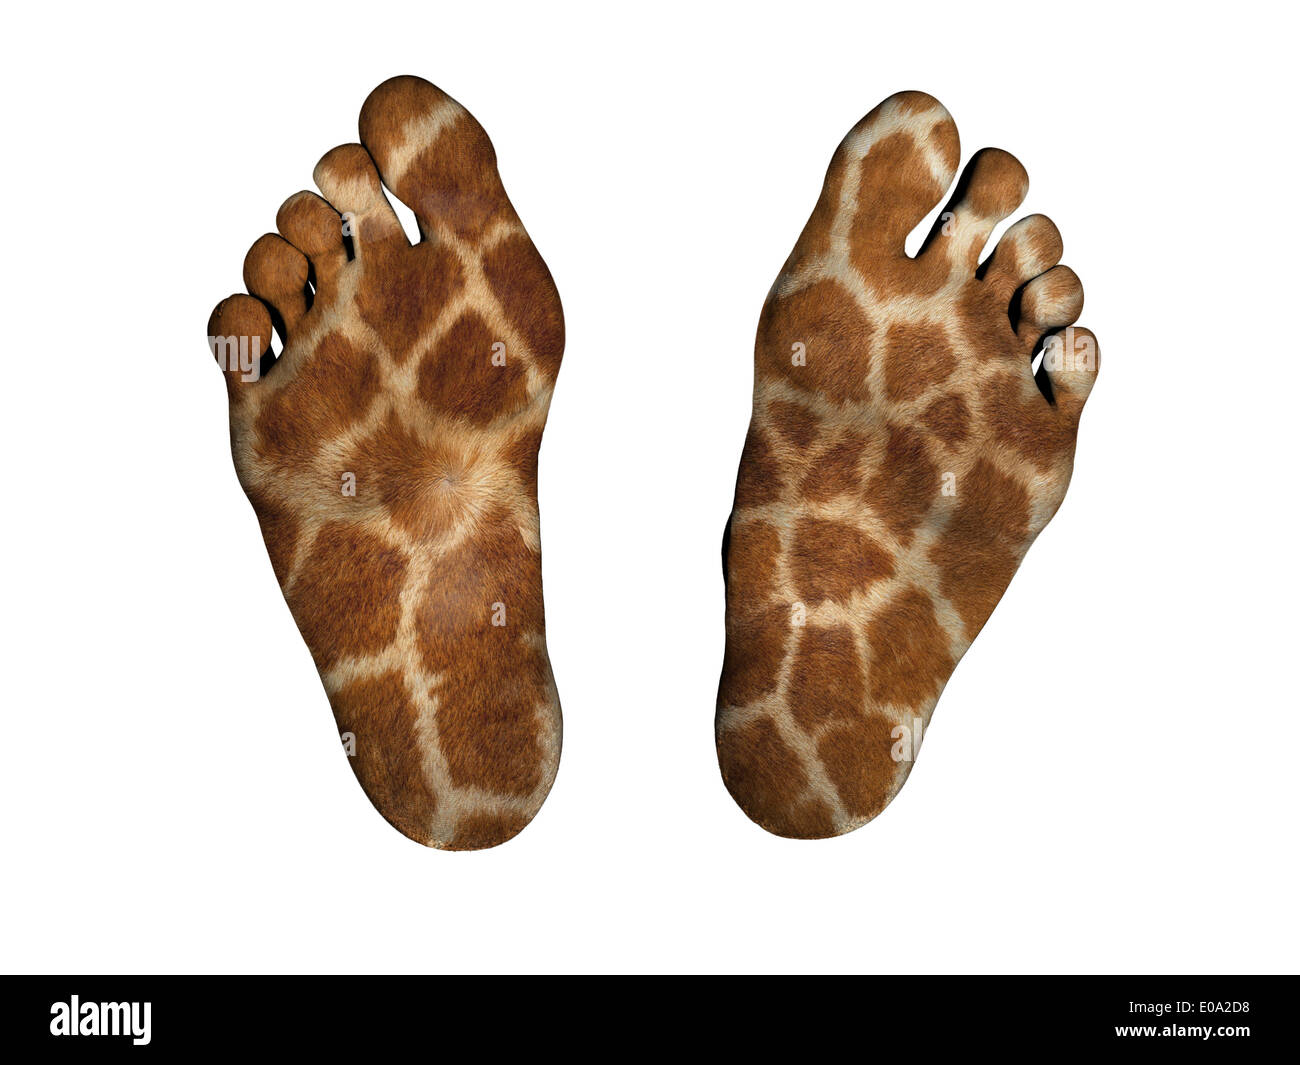 Des pieds humains isolated on white girafe imprimer Banque D'Images